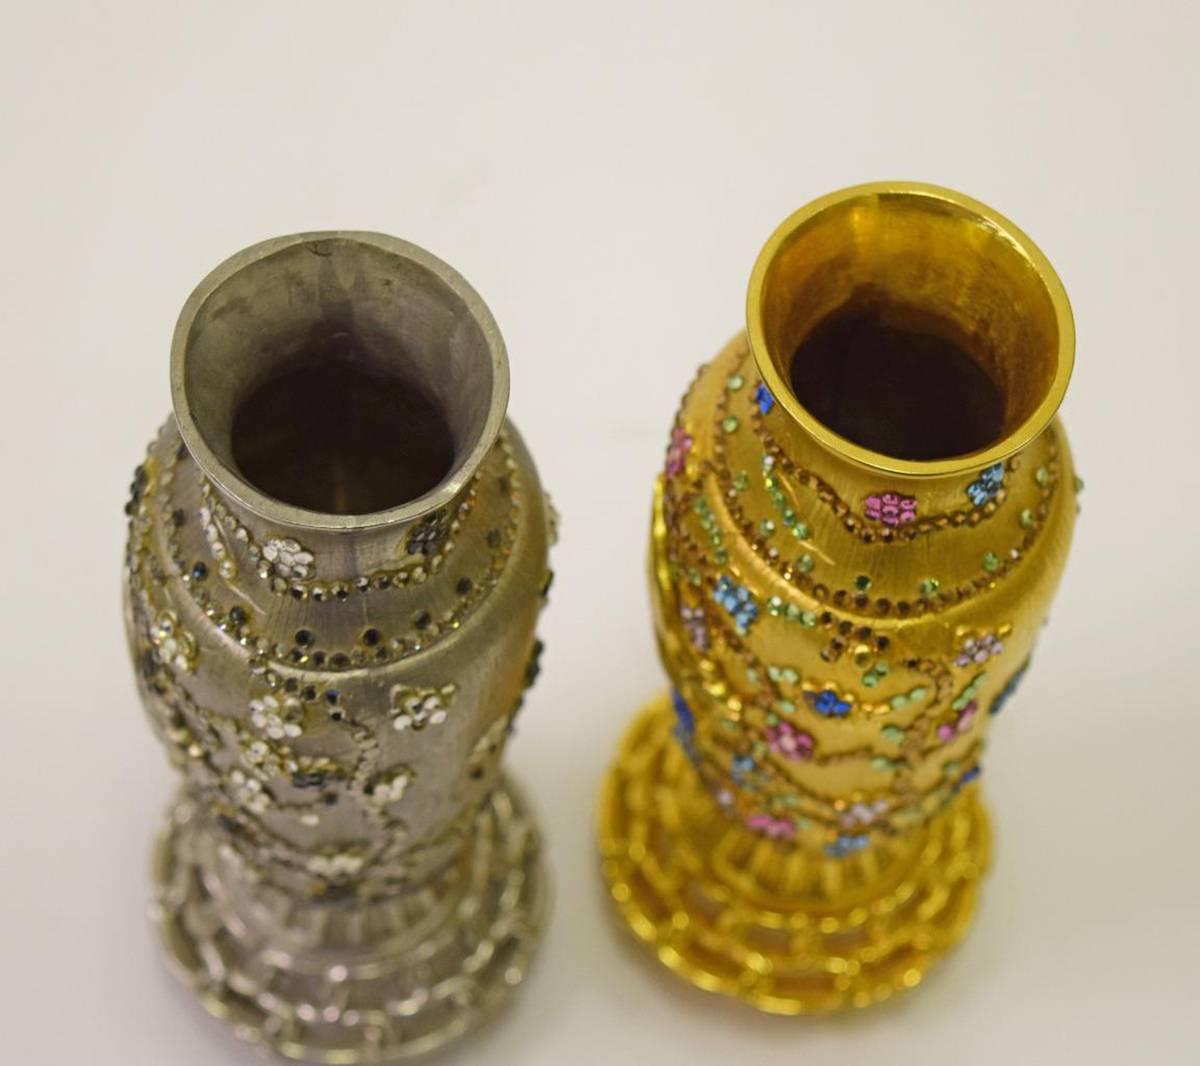 Awesome and unique vintage Judith Leiber Asian holiday vases, beautifully decorated with bird and flower motifs and adorned with multicolored crystals. The vases measure 5.75